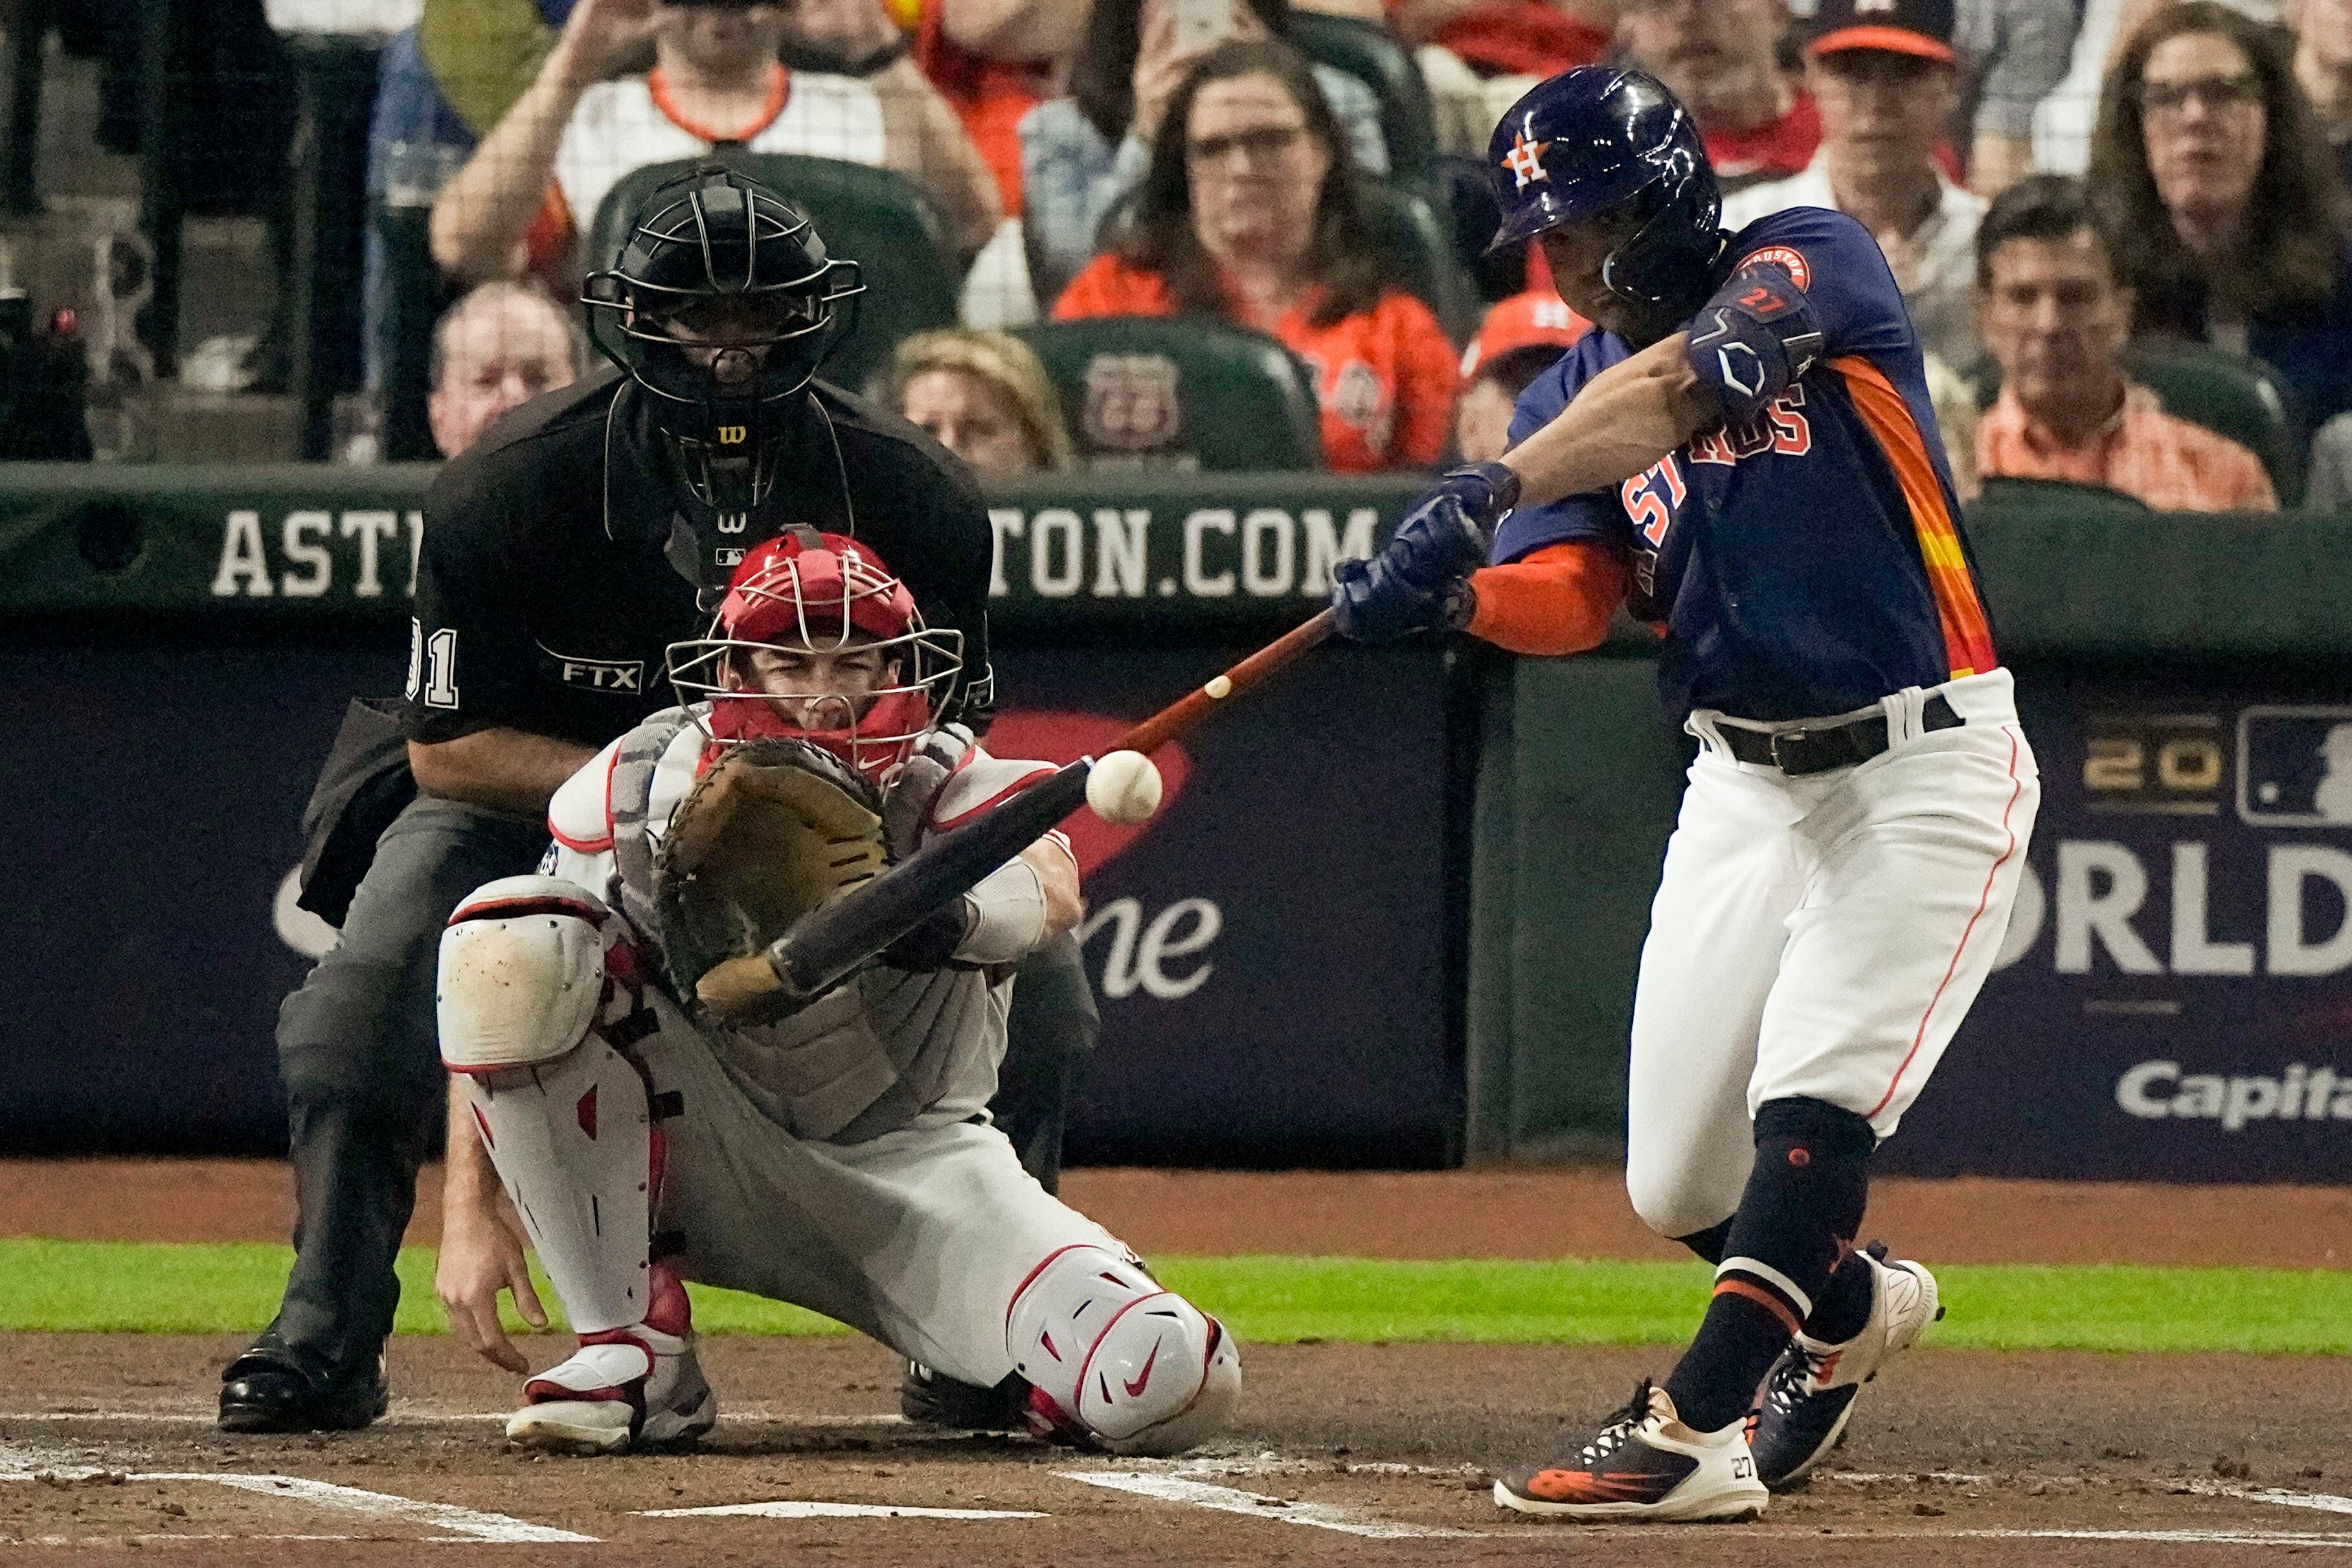 Altuve hits 3 HRs, Astros rout Rangers for outright division lead